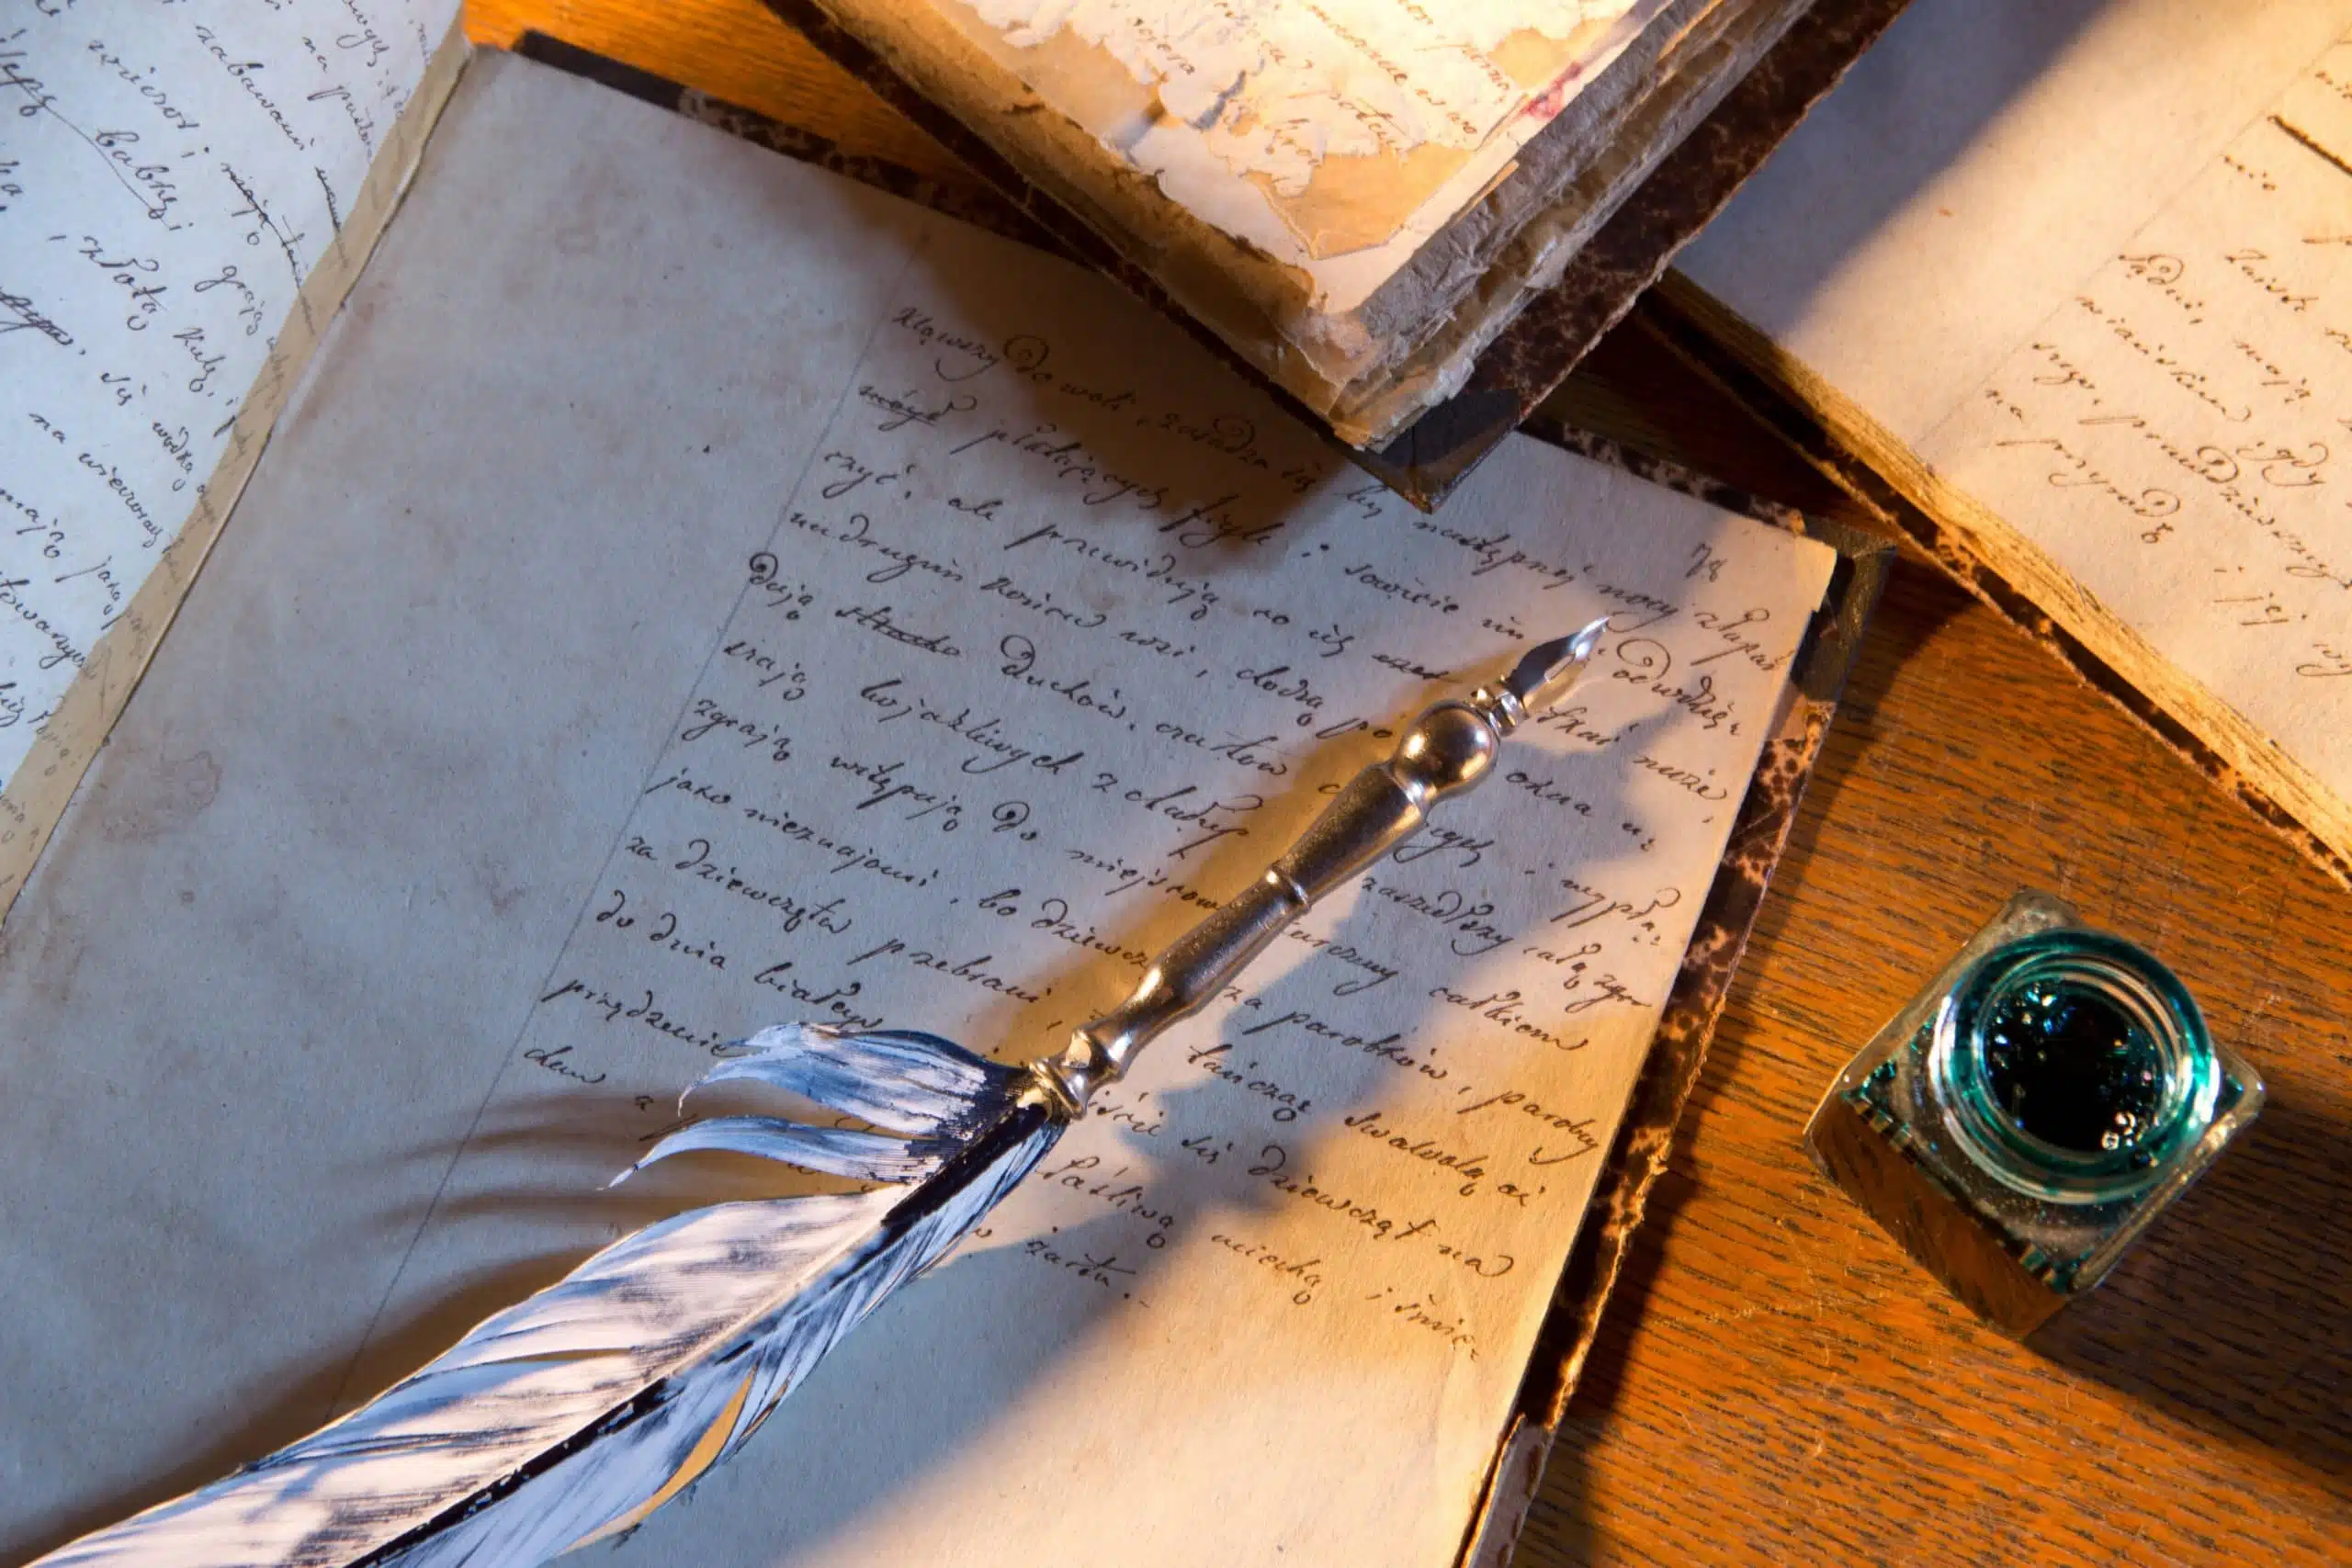 Quill pen on vintage notebook with medieval writing